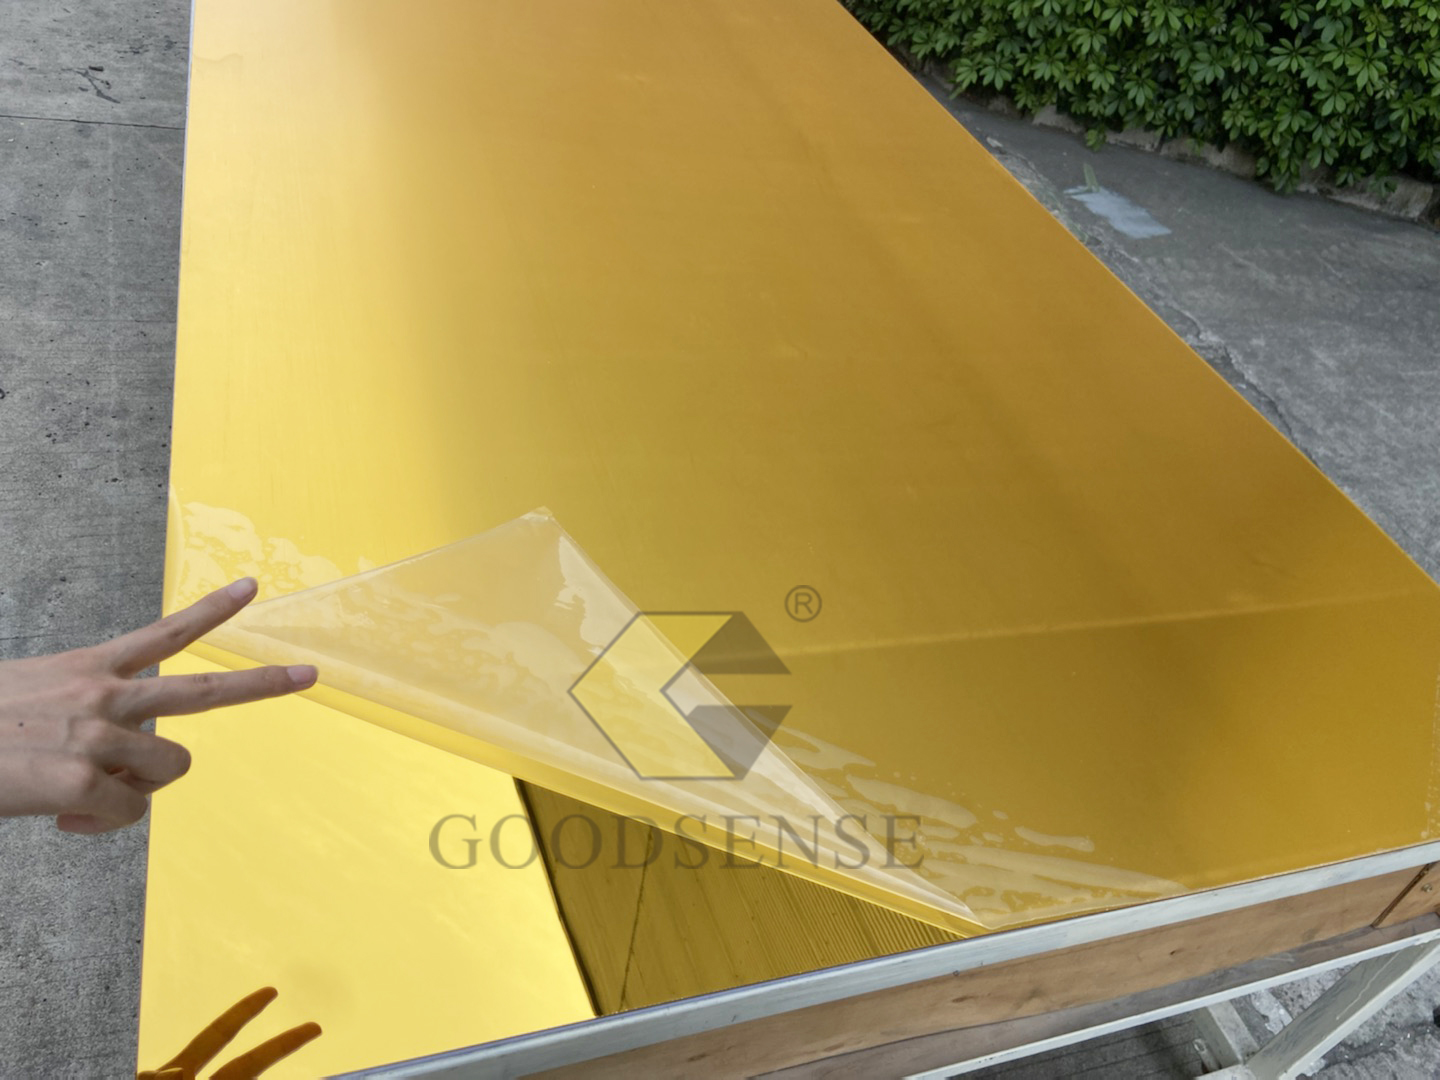 Removable Acryl Lucite Mirror Sheets Thick PMMA Mirror Plexiglass Organic High Gloss Perspex Discs Tiles Mirror China for Cake Topper Goodsense Gold Acrylic Double Sided Mirror Wholesale